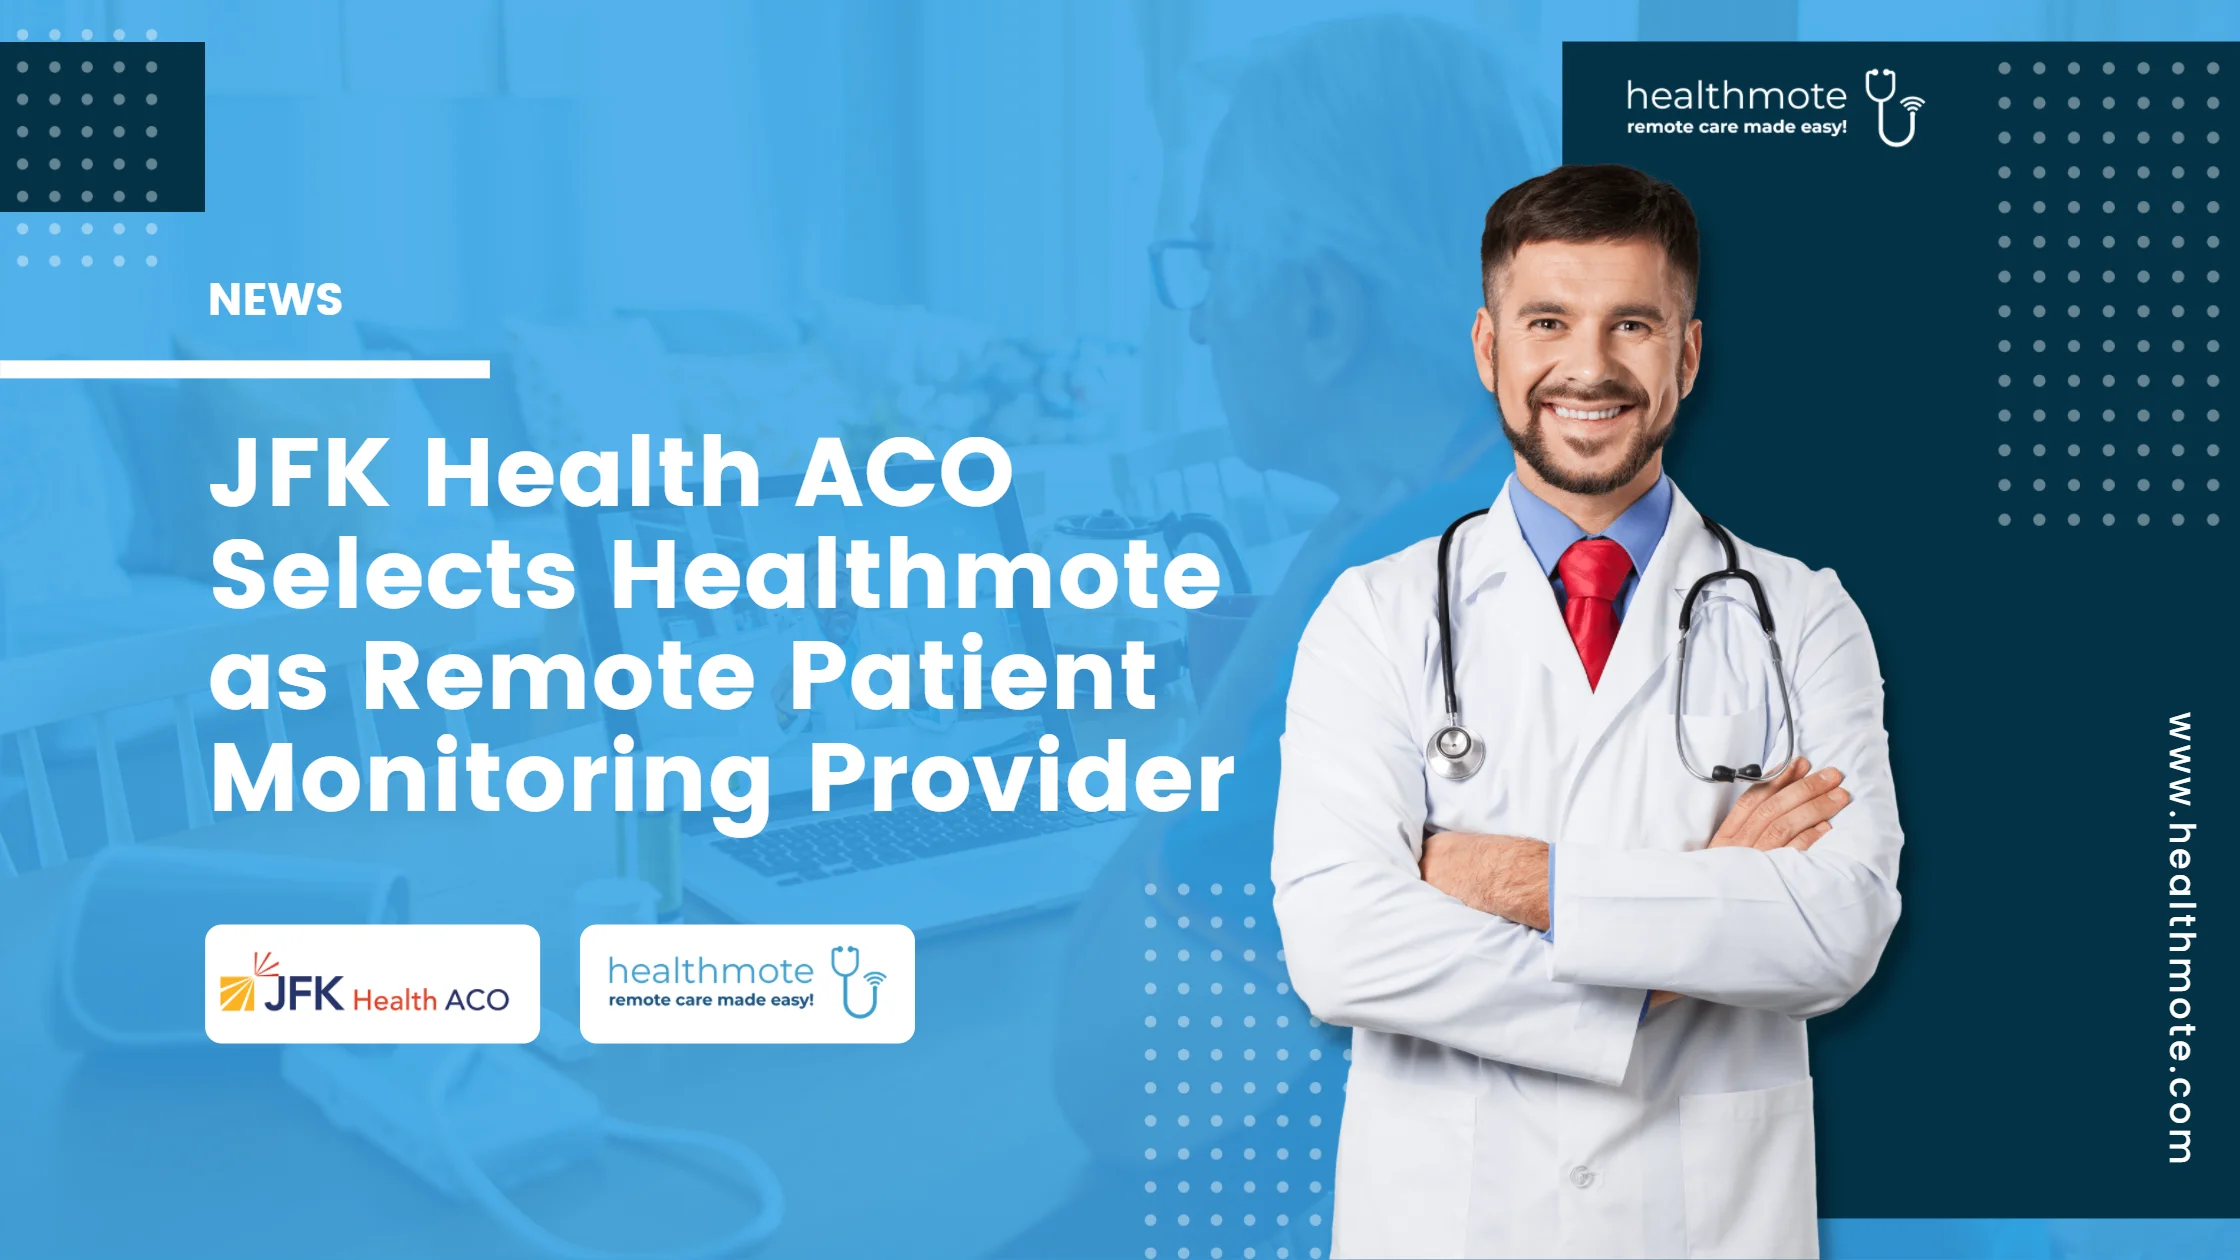 JFK Health ACO Selects Healthmote as Remote Patient Monitoring